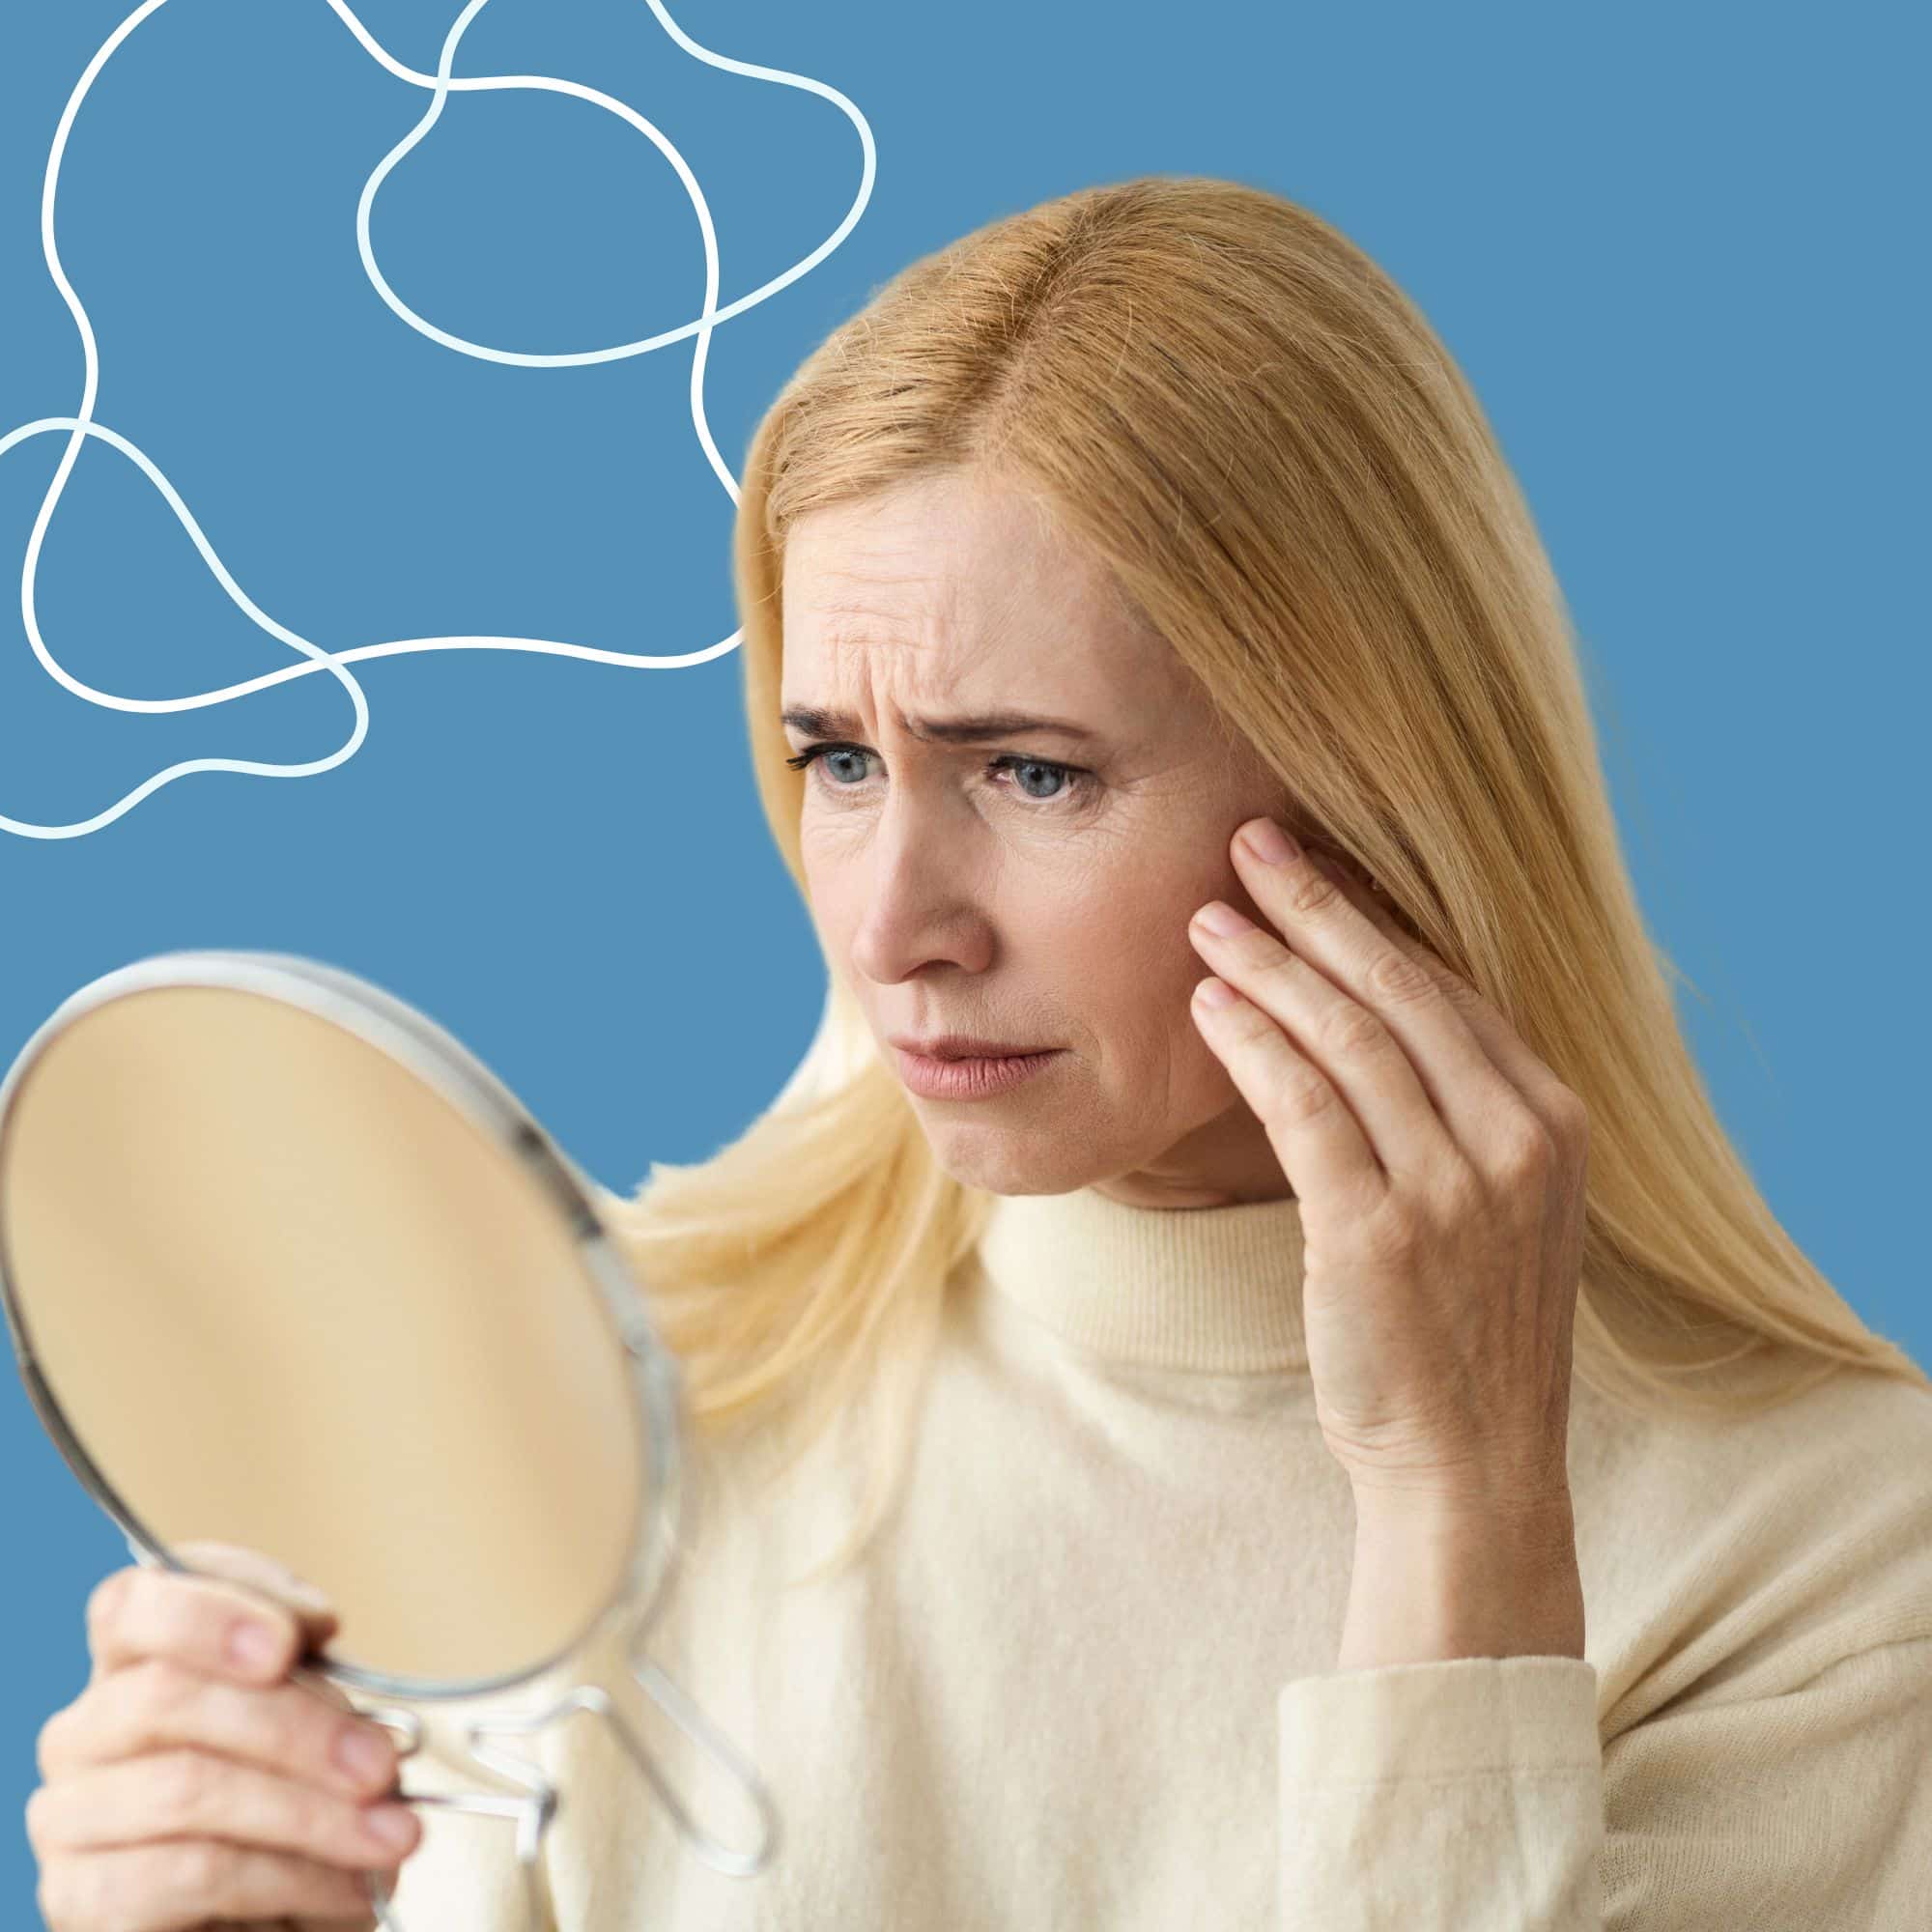 Woman looking in the mirror after facial trauma